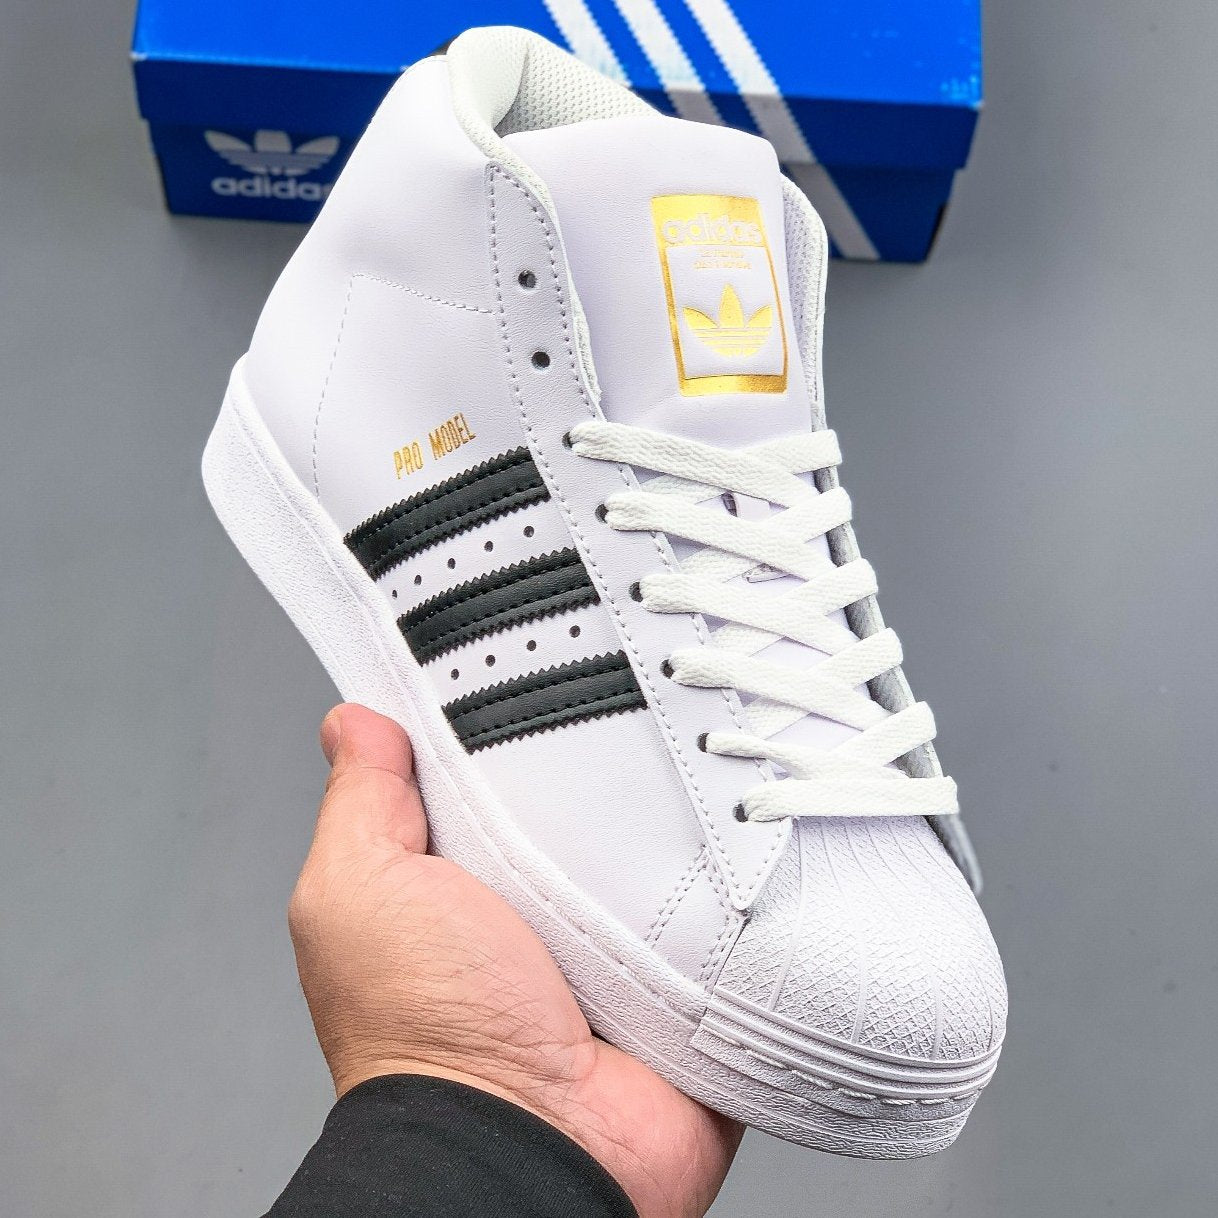 Adidas Superstar Pro Model Sneakers Shoes from aamall1.myshopify